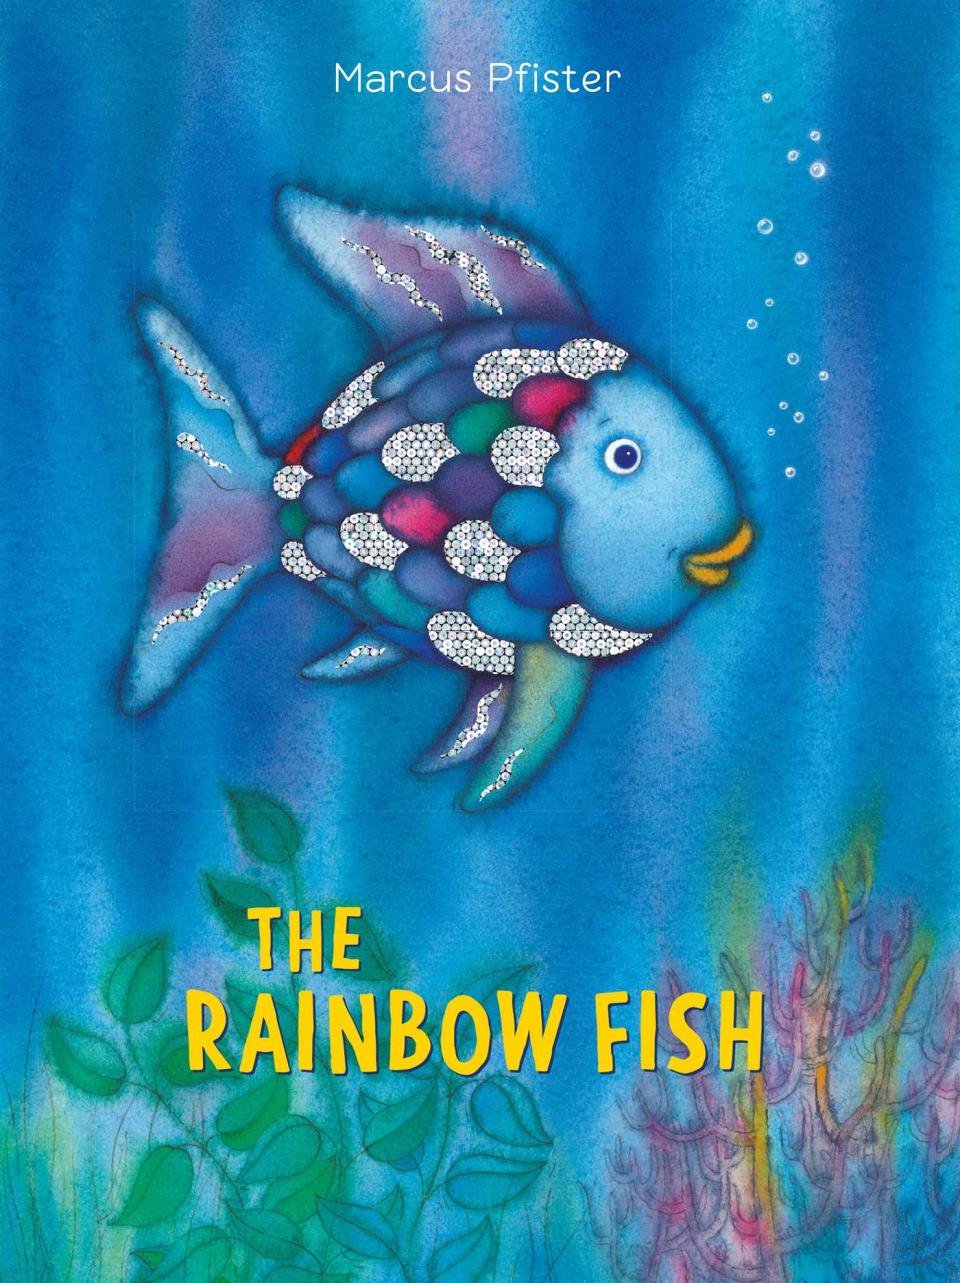 "The Rainbow Fish" by Marcus Pfister.